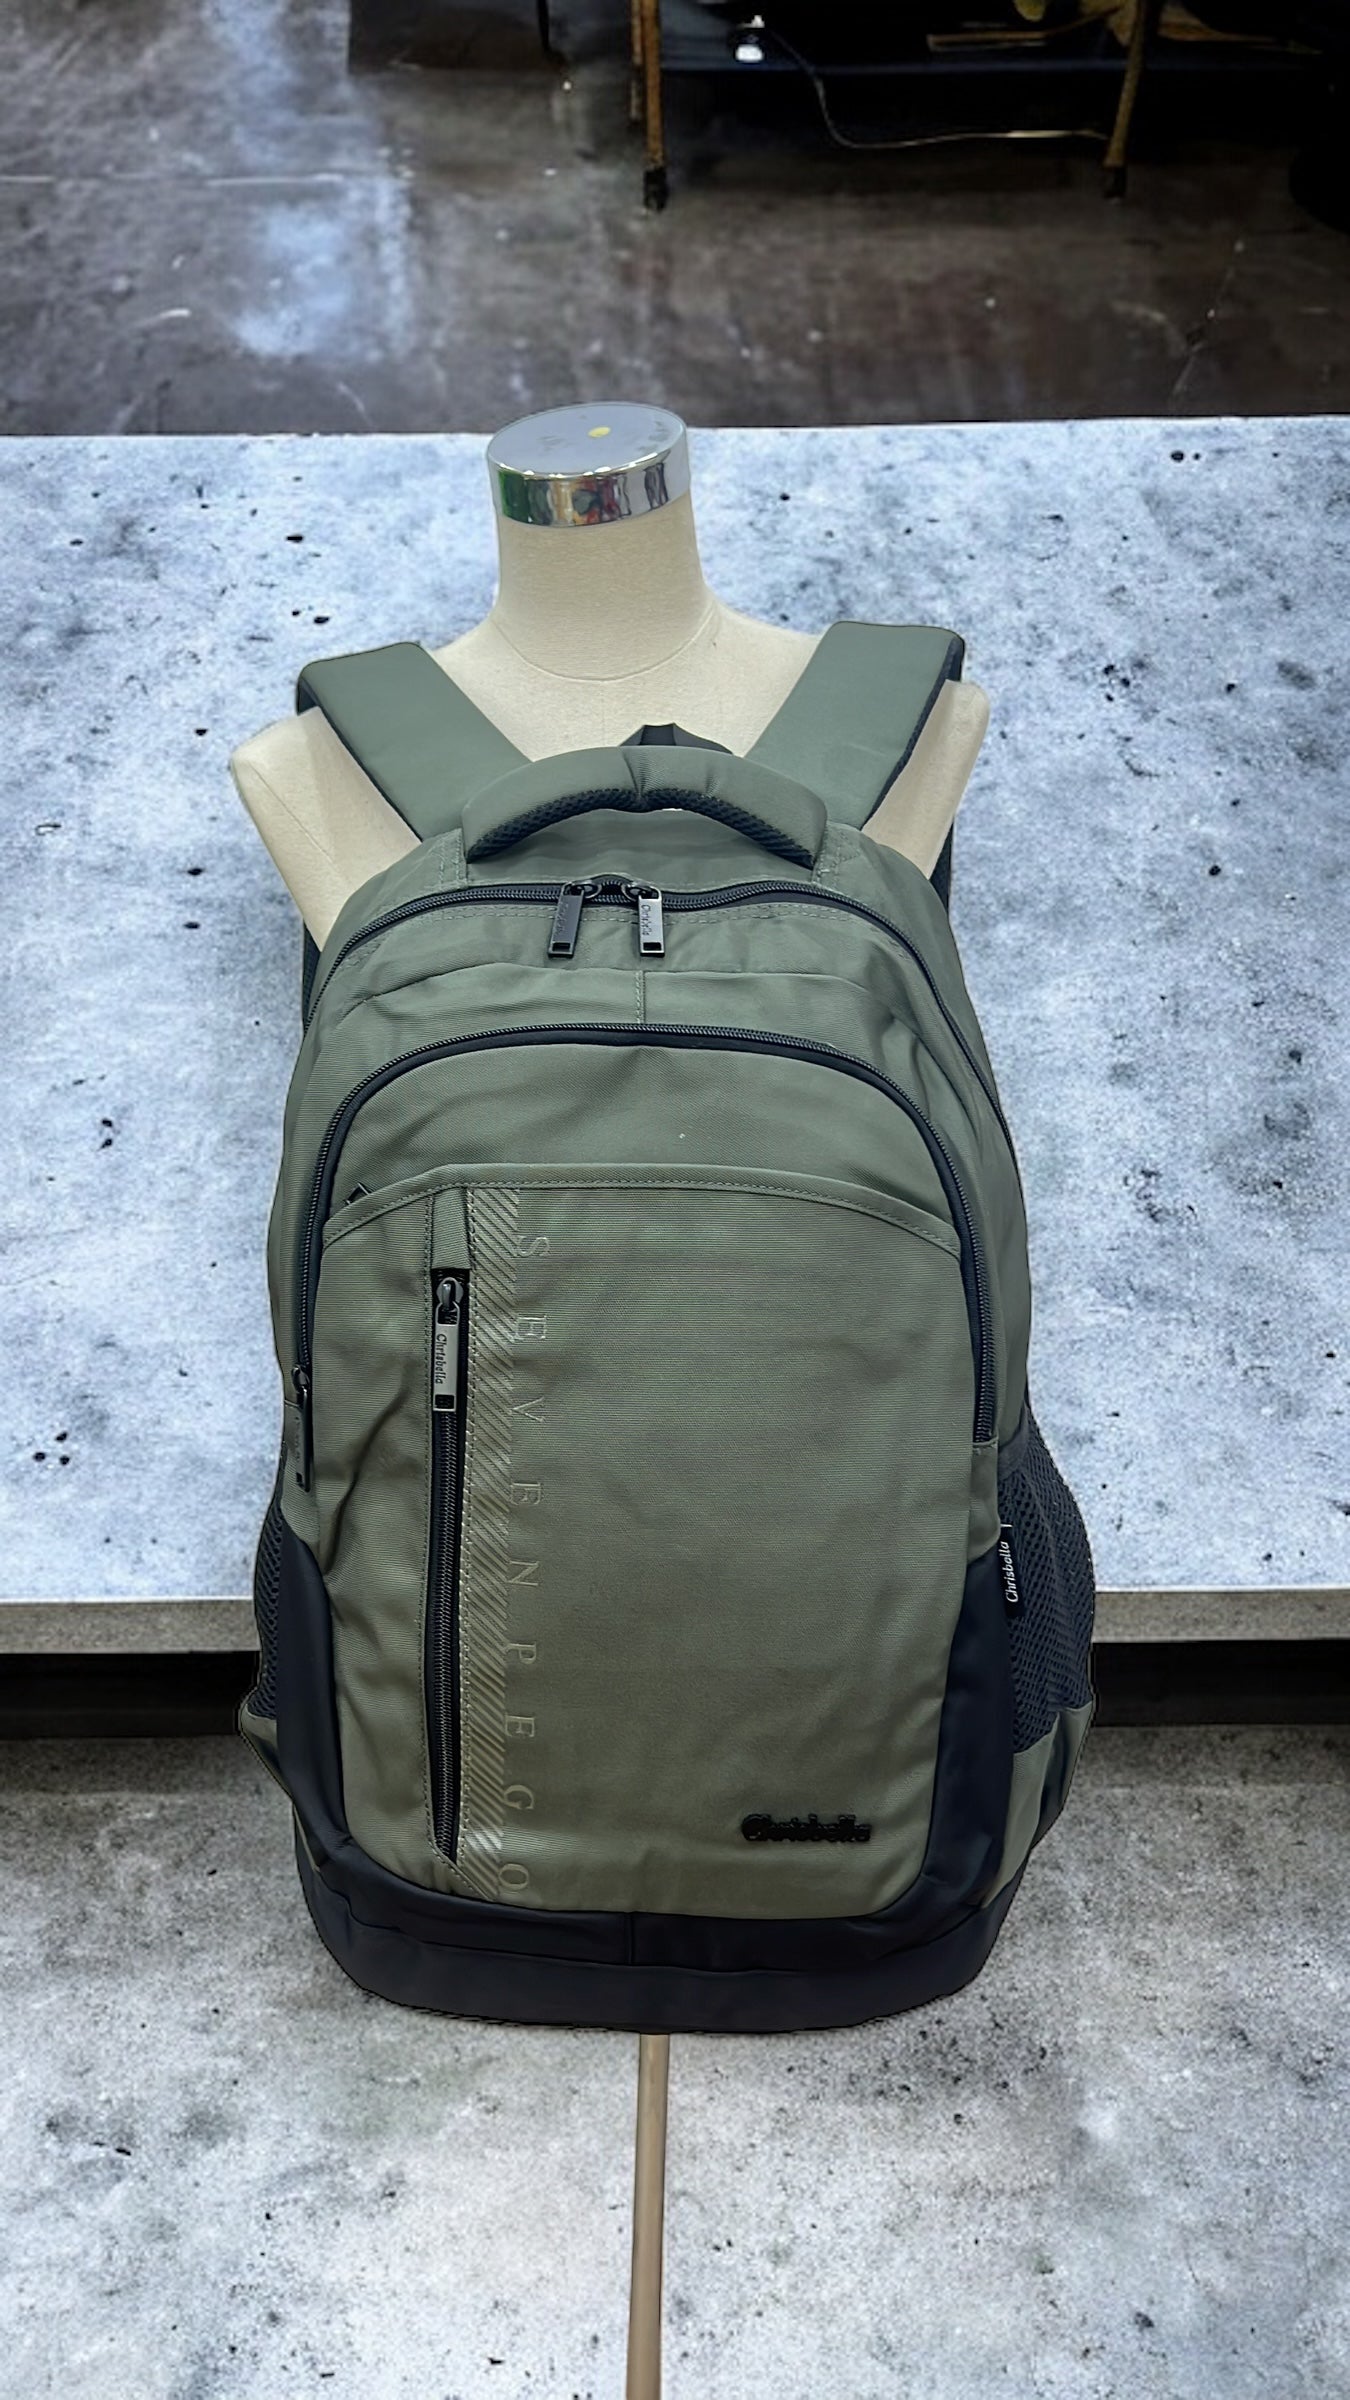 CHRISBELLA SEVEN PEGO BACKPACK IN ARMY GREEN